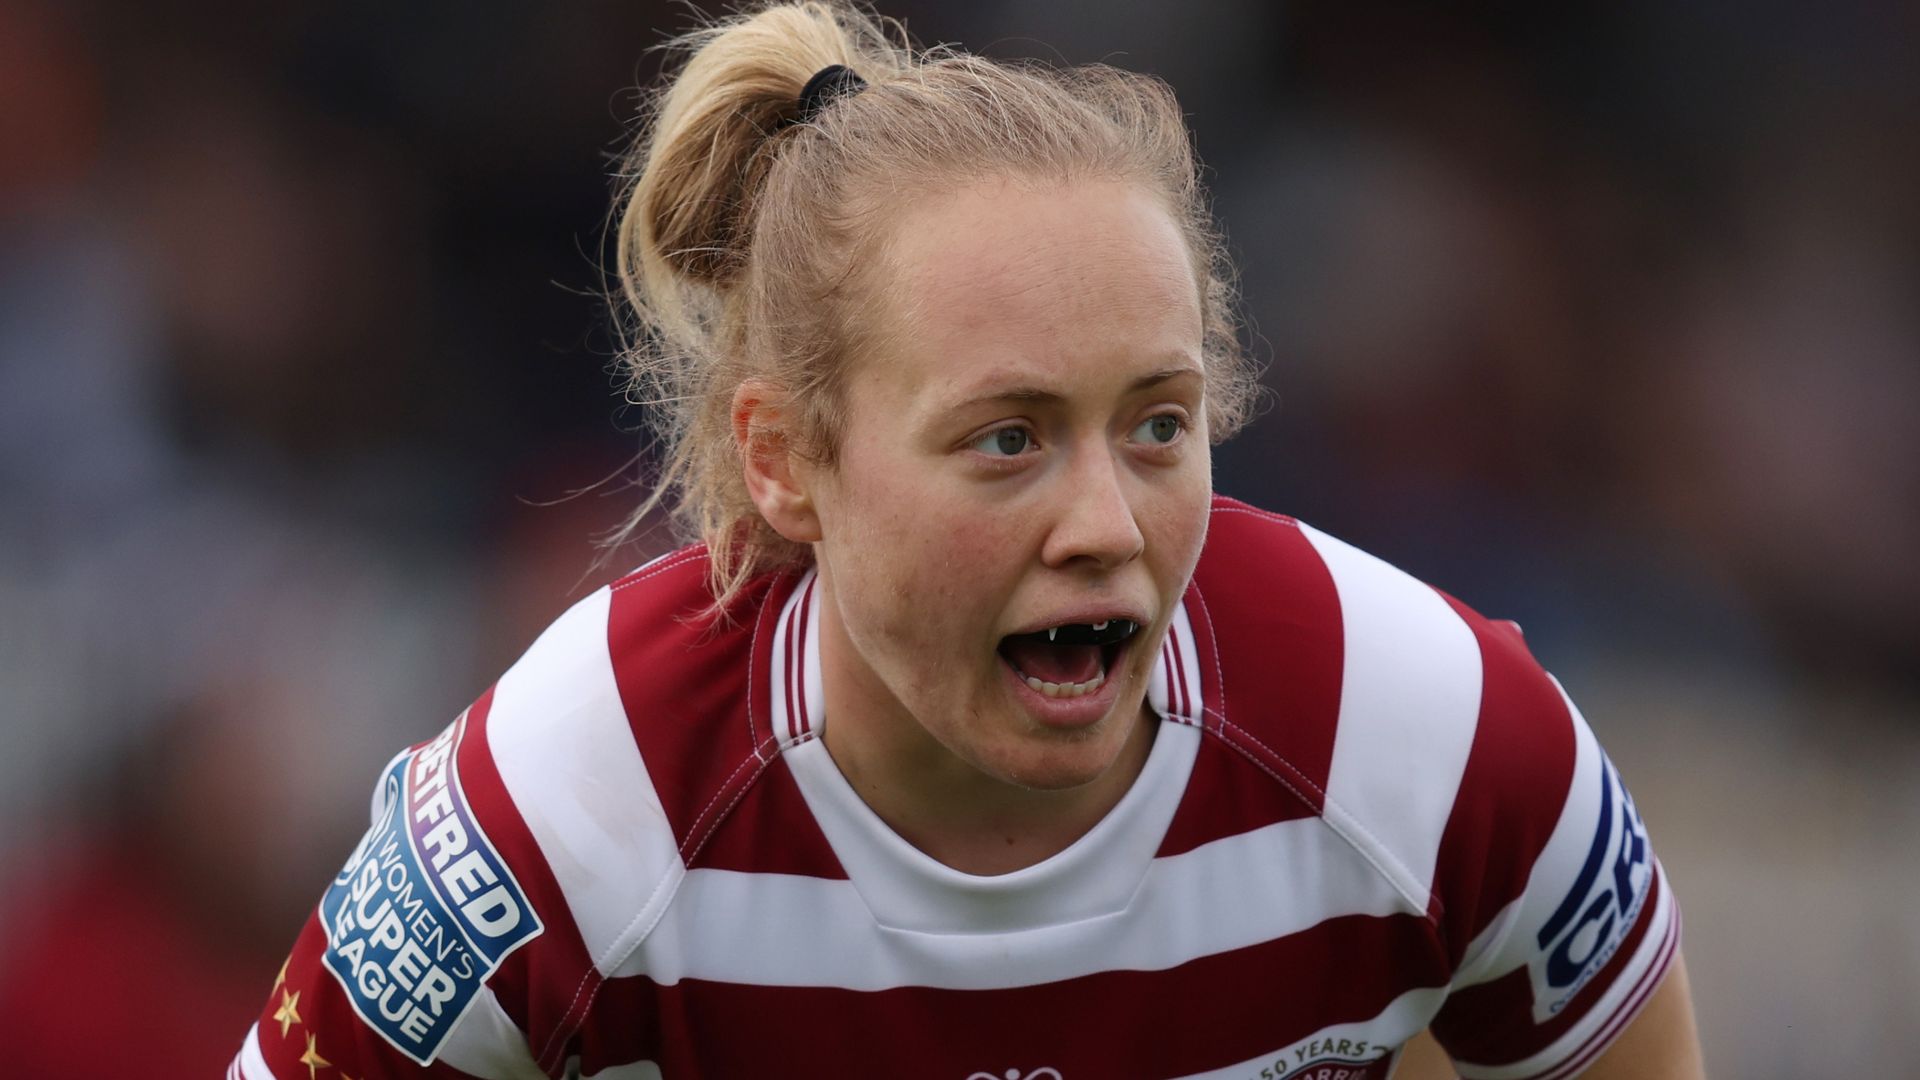 'We didn't play rugby at school' - Davies's delight at women's RL progress